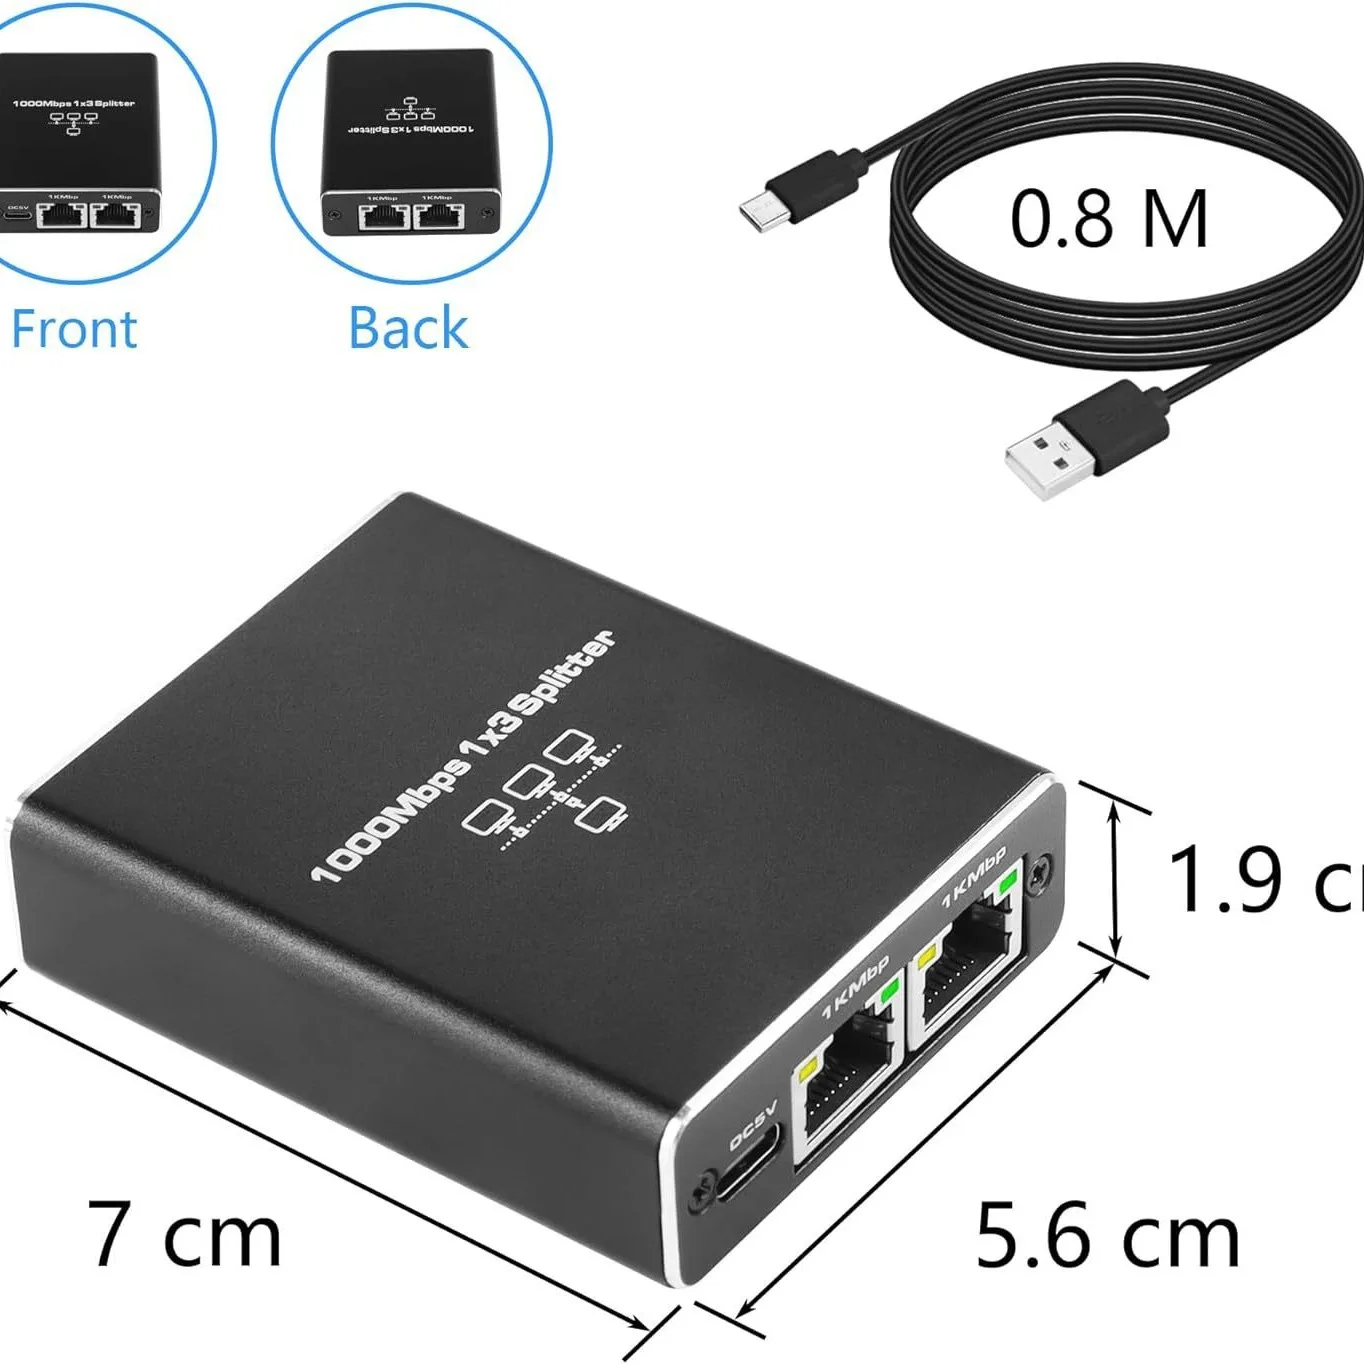 

Rj45 Splitter 1 to 3 Gigabit Ethernet Adapter with USB Power Cable 1000Mbps Internet Network Cable Extender RJ45 LAN Switch